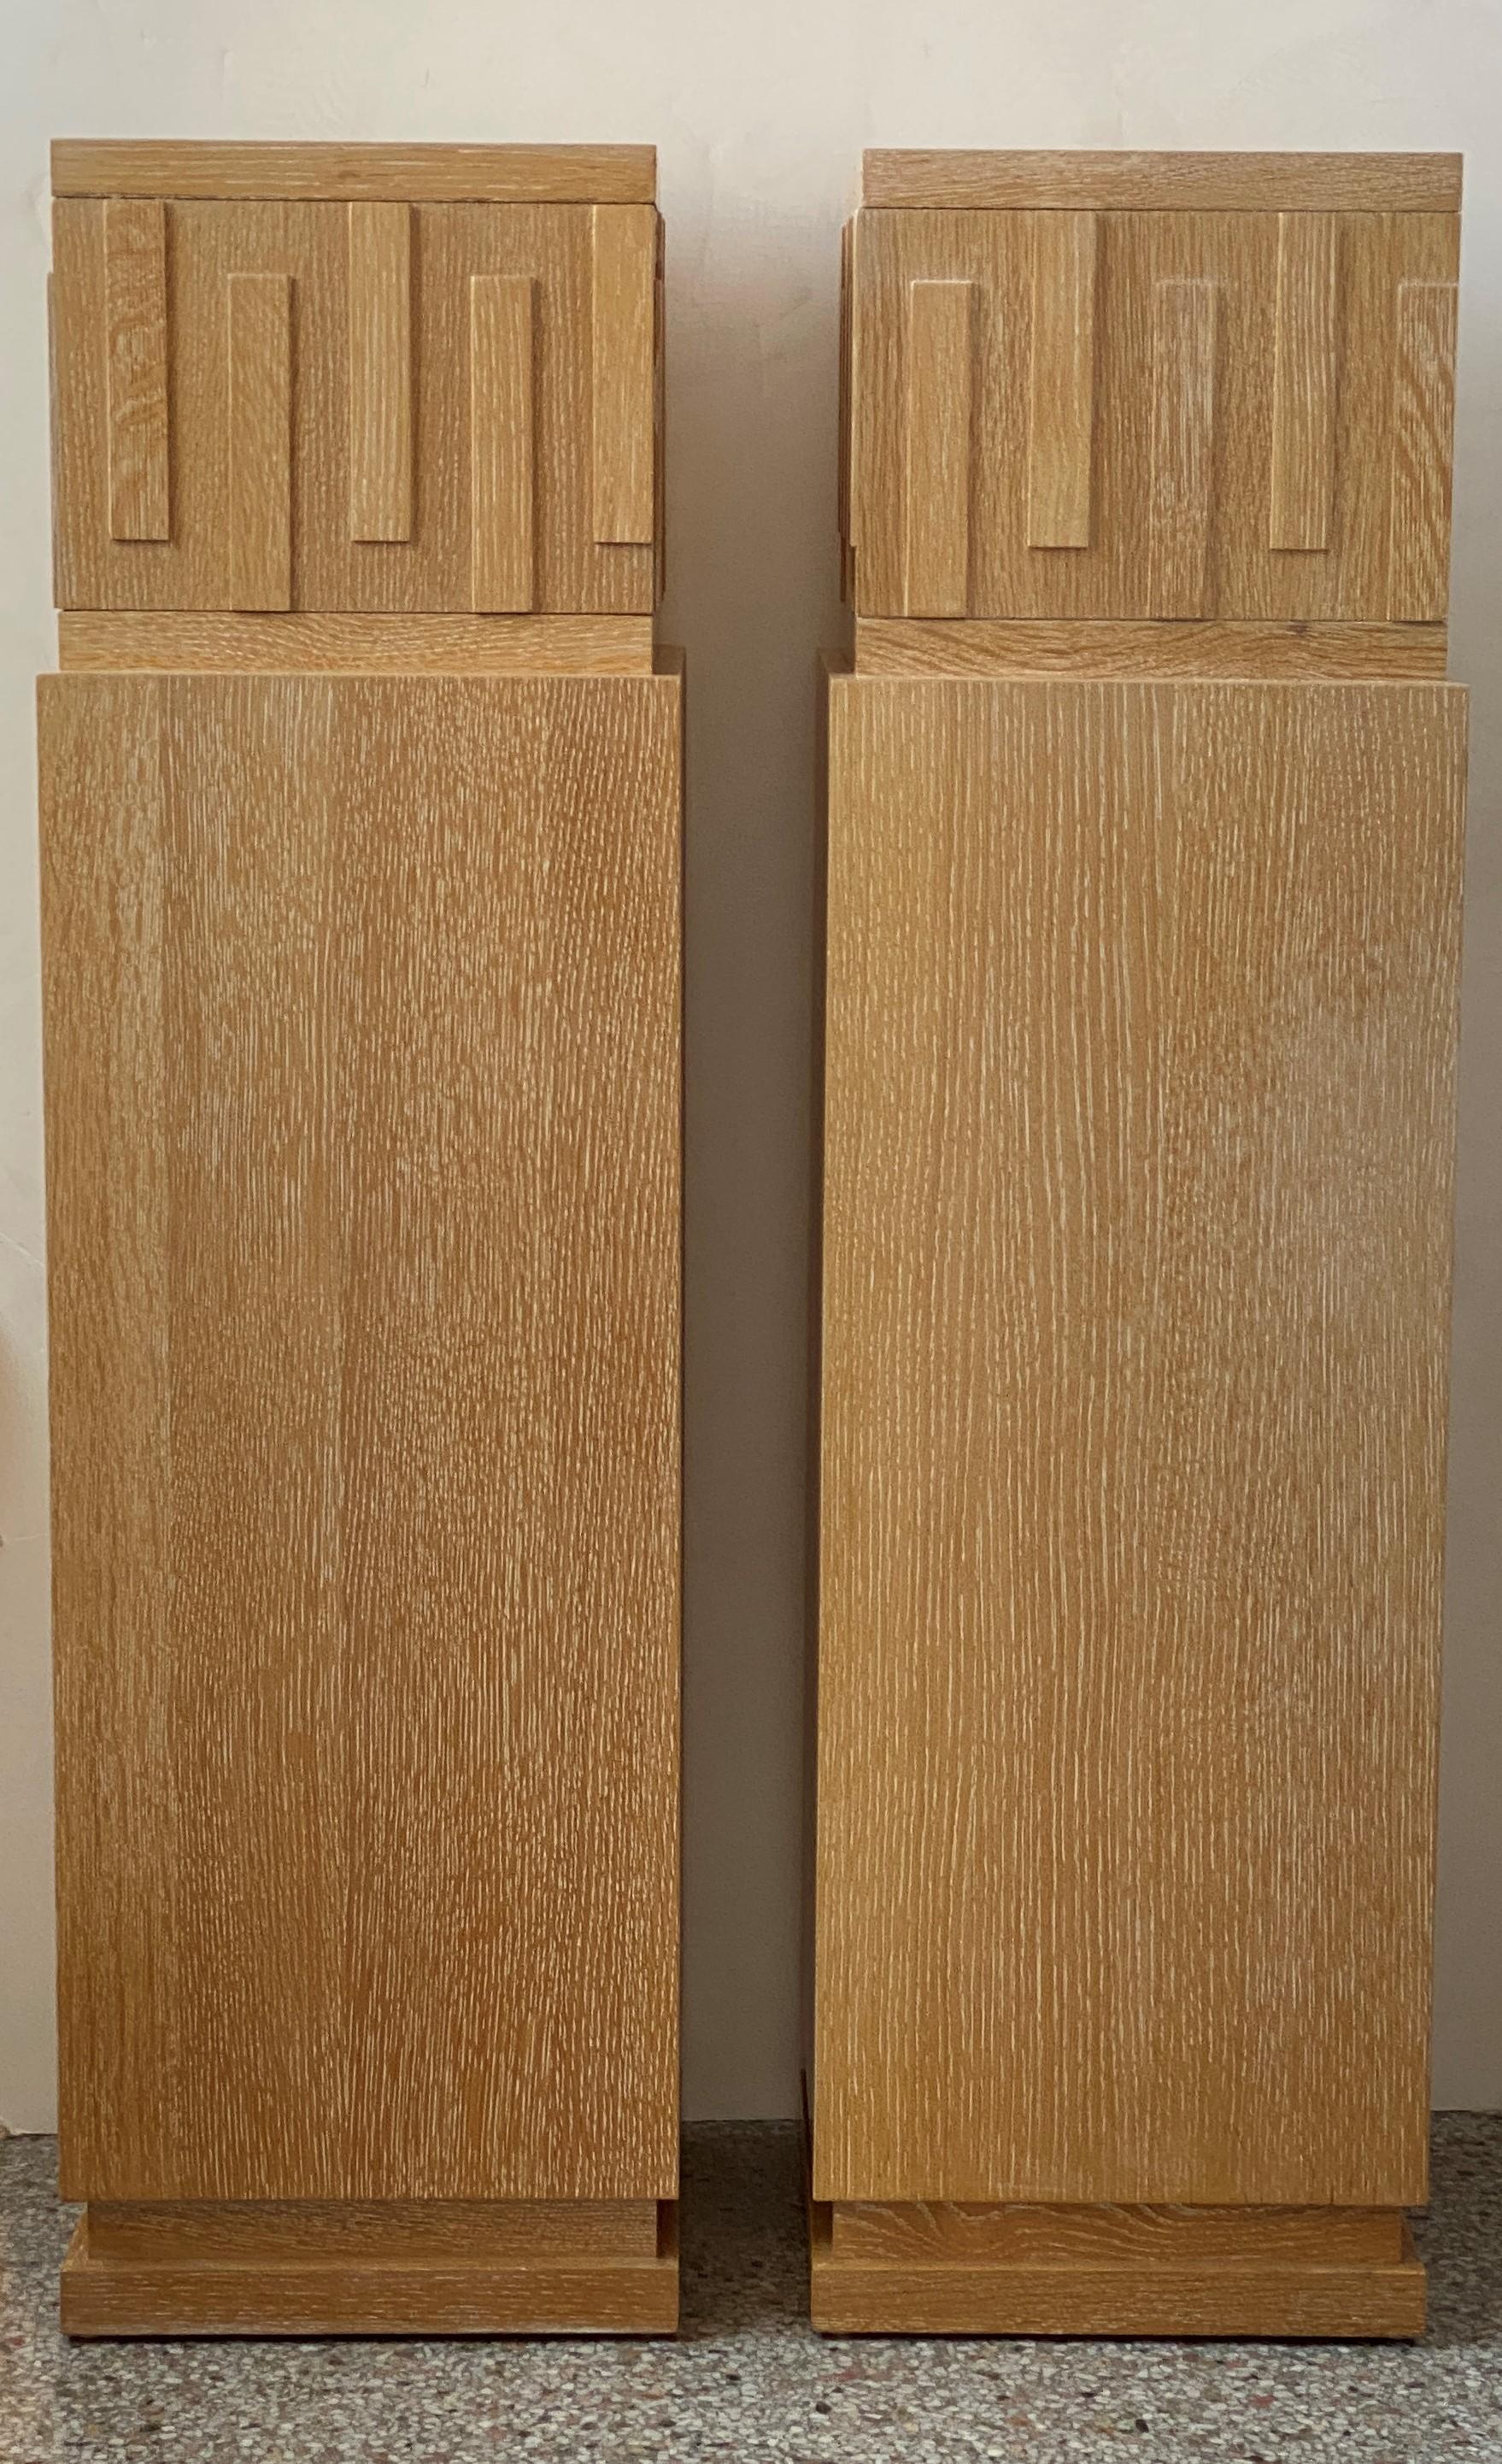 This stylish set of Art Deco Modern style pedestals are fabricated in cerused oak and they will make a definite understated statement for your sculptures.

Note: Top dimensions are 12.50